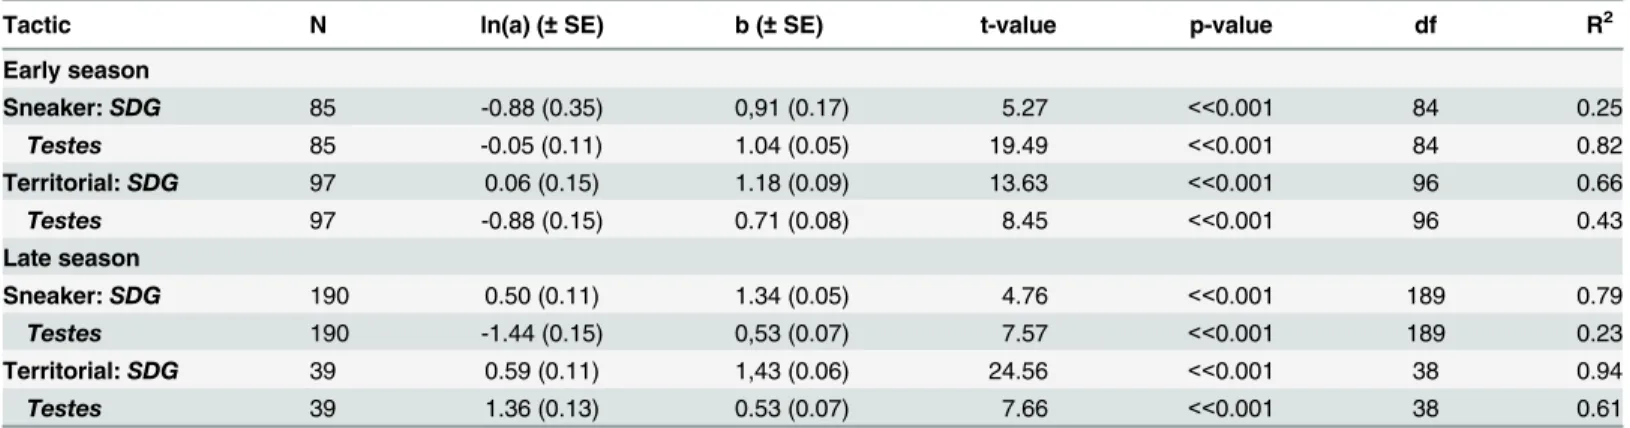 Table 2. Allometric relations between seminal duct gland (SDG) and testes (T) weights vs soma weight for “sneaker” and “territorial” males cate- cate-gorised to tactics based on histological findings (Table 1) (early season: sneakers &lt; 35 mm and territo